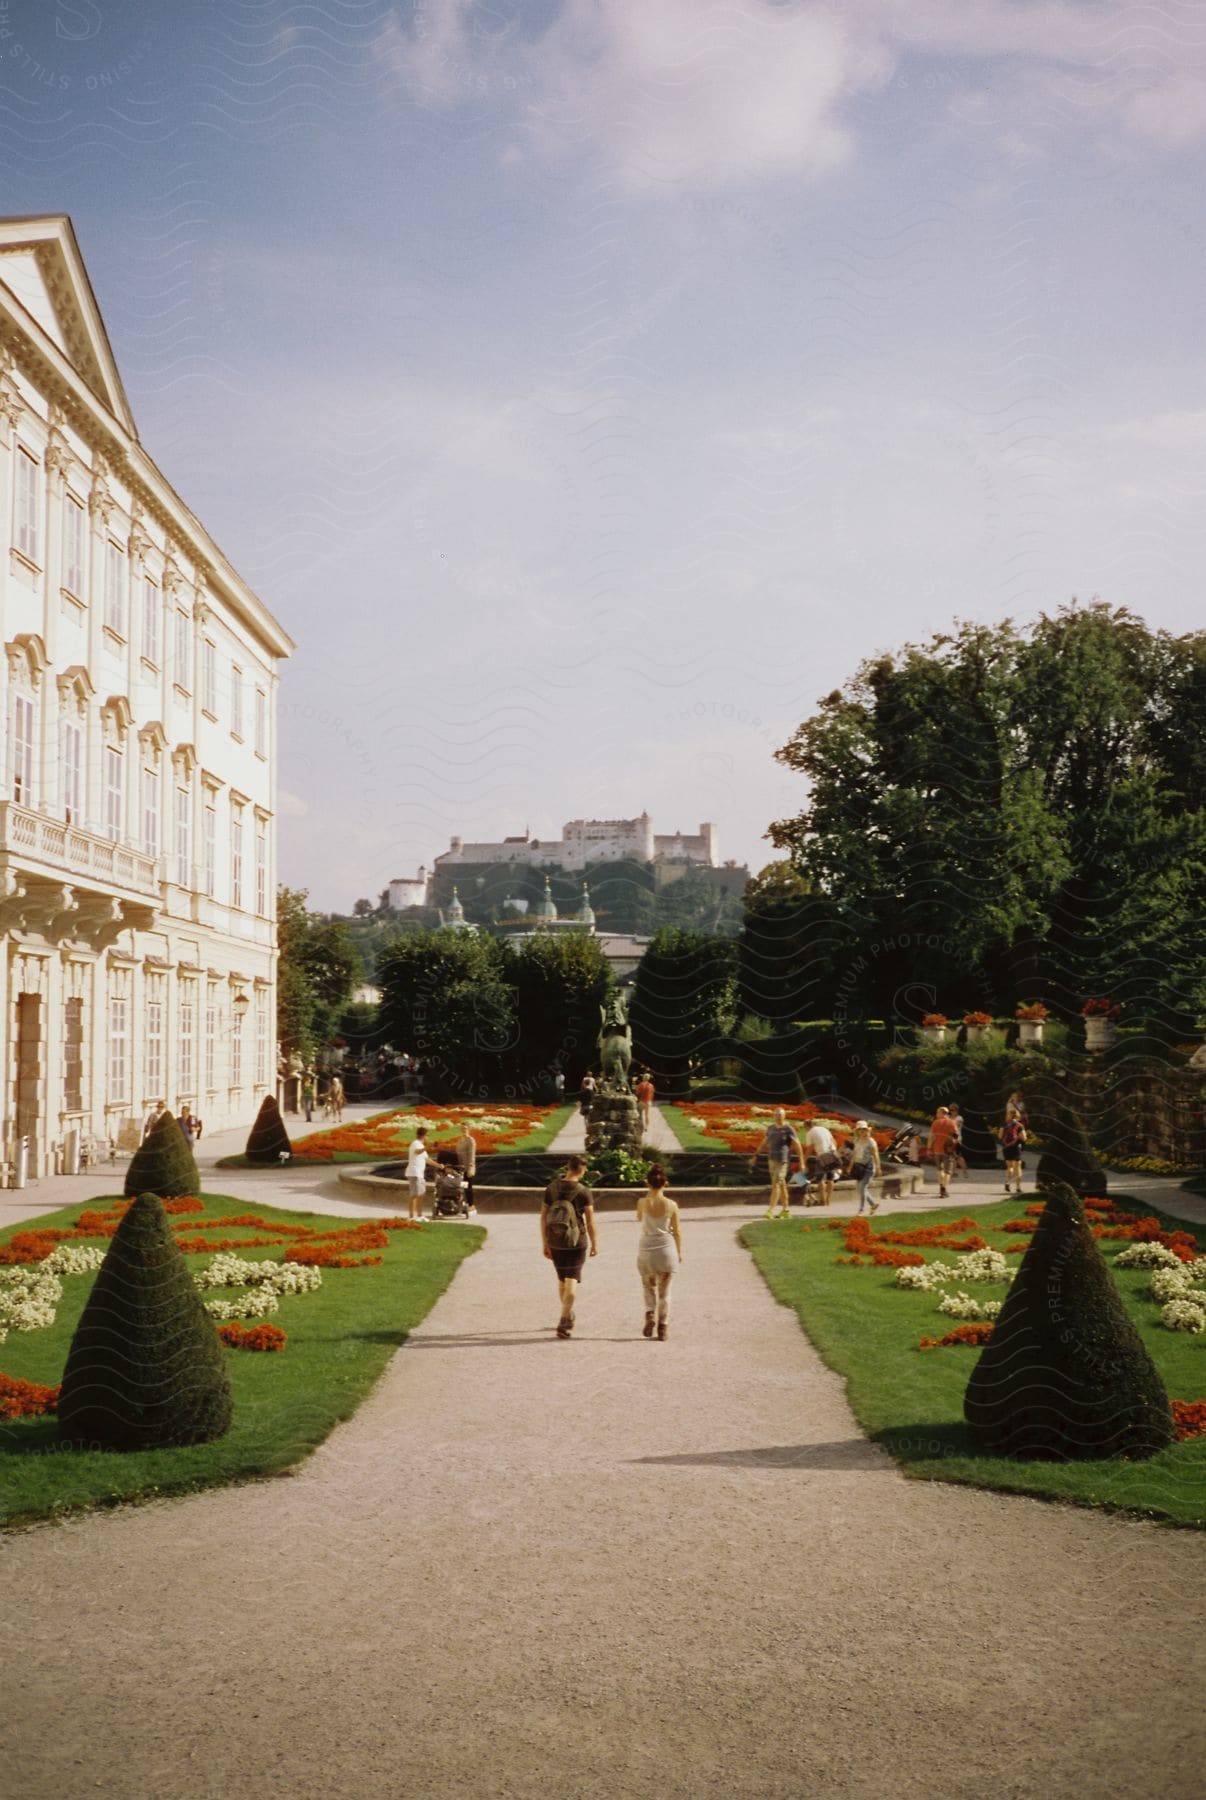 People walking on a courtyard path in front of a white building